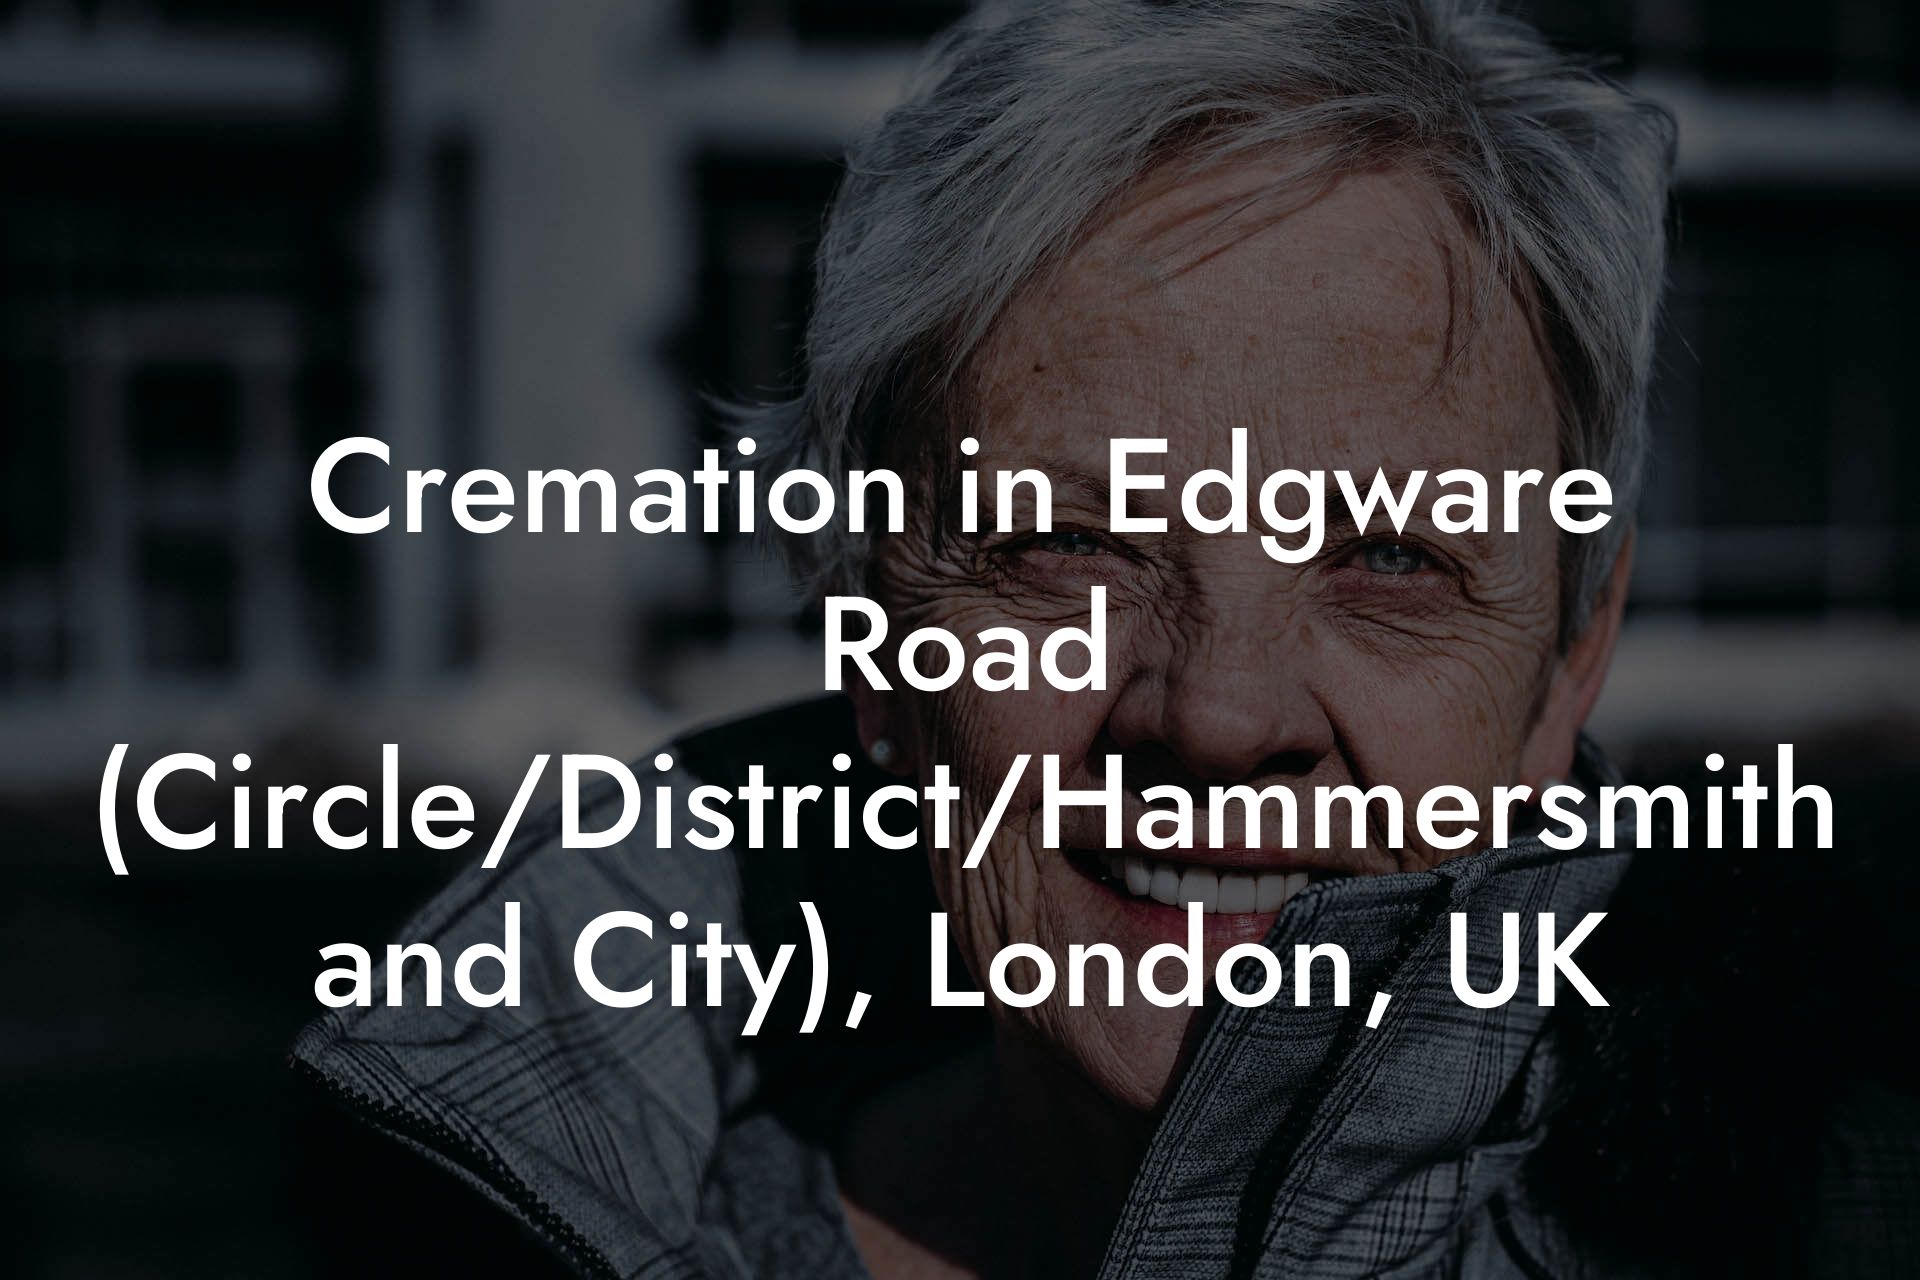 Cremation in Edgware Road (Circle/District/Hammersmith and City), London, UK